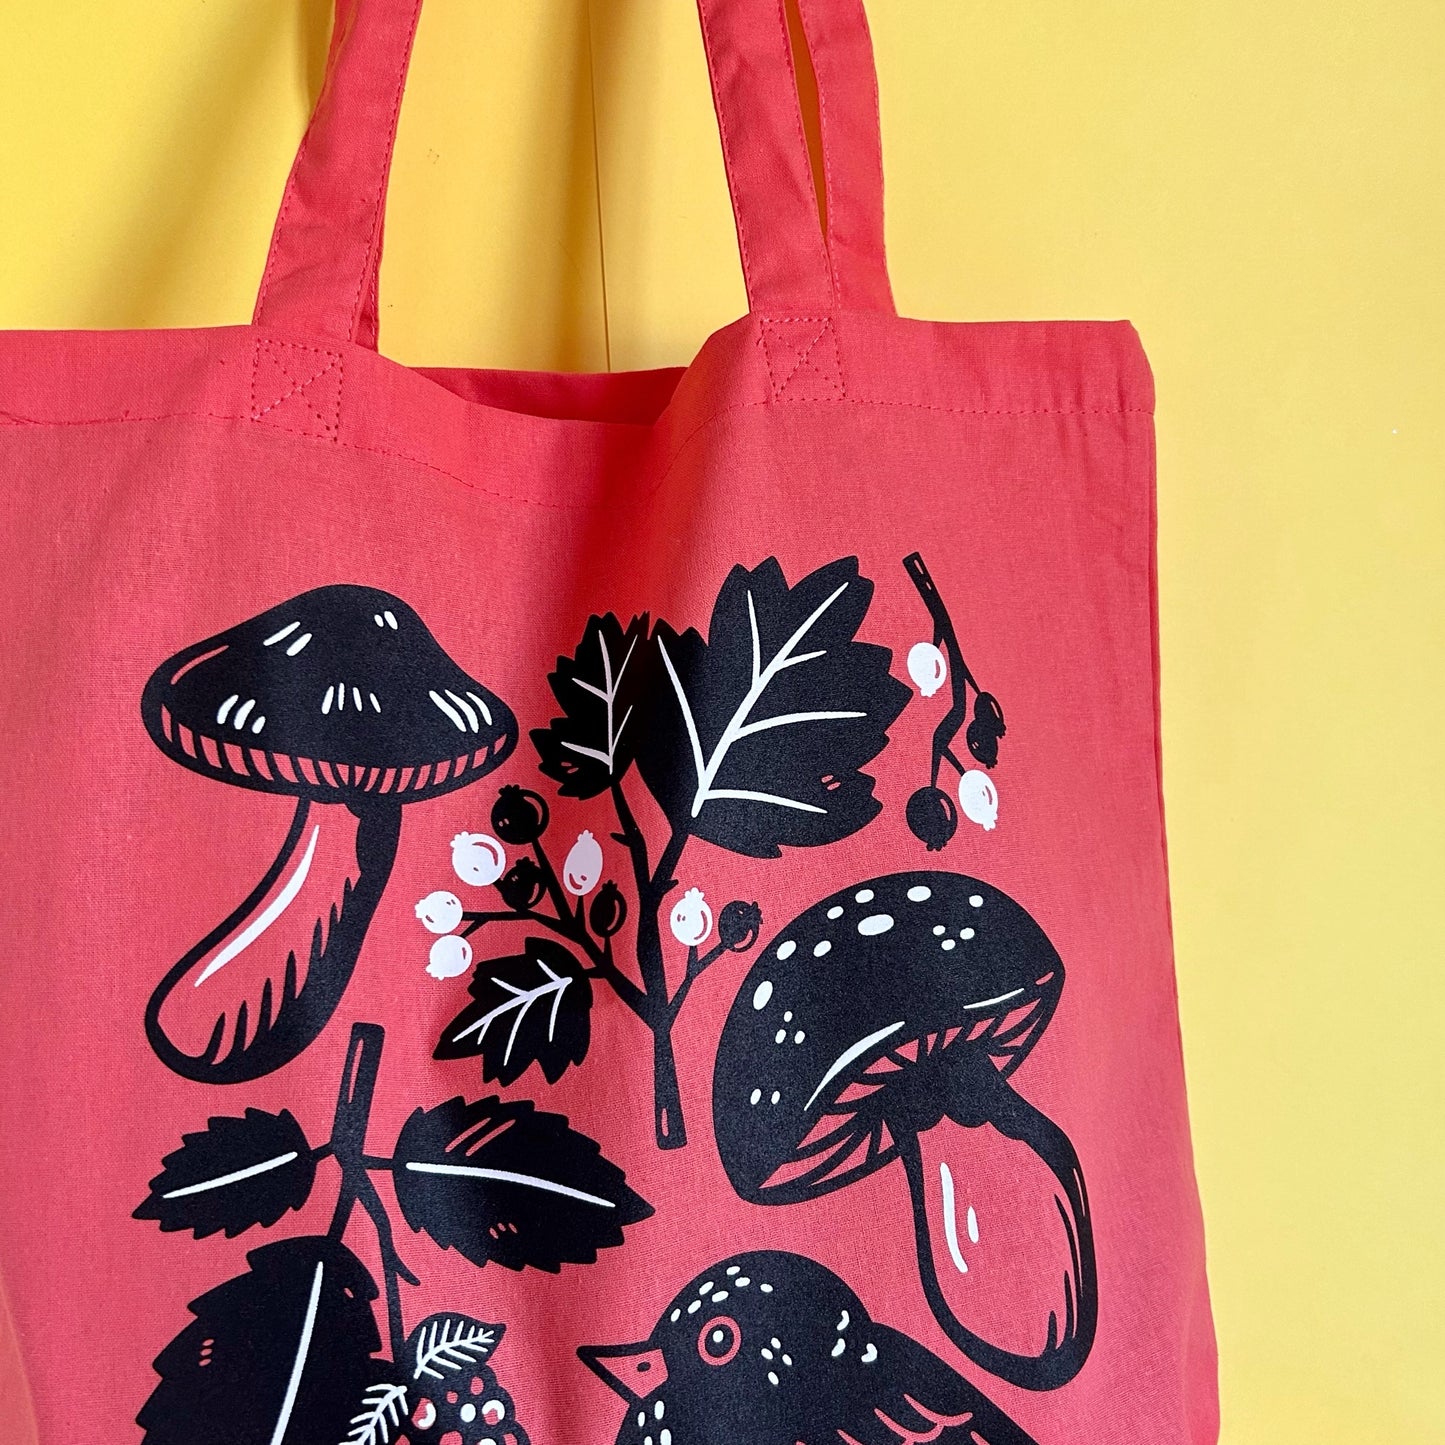 Blackbird Tote Bag in Coral Red